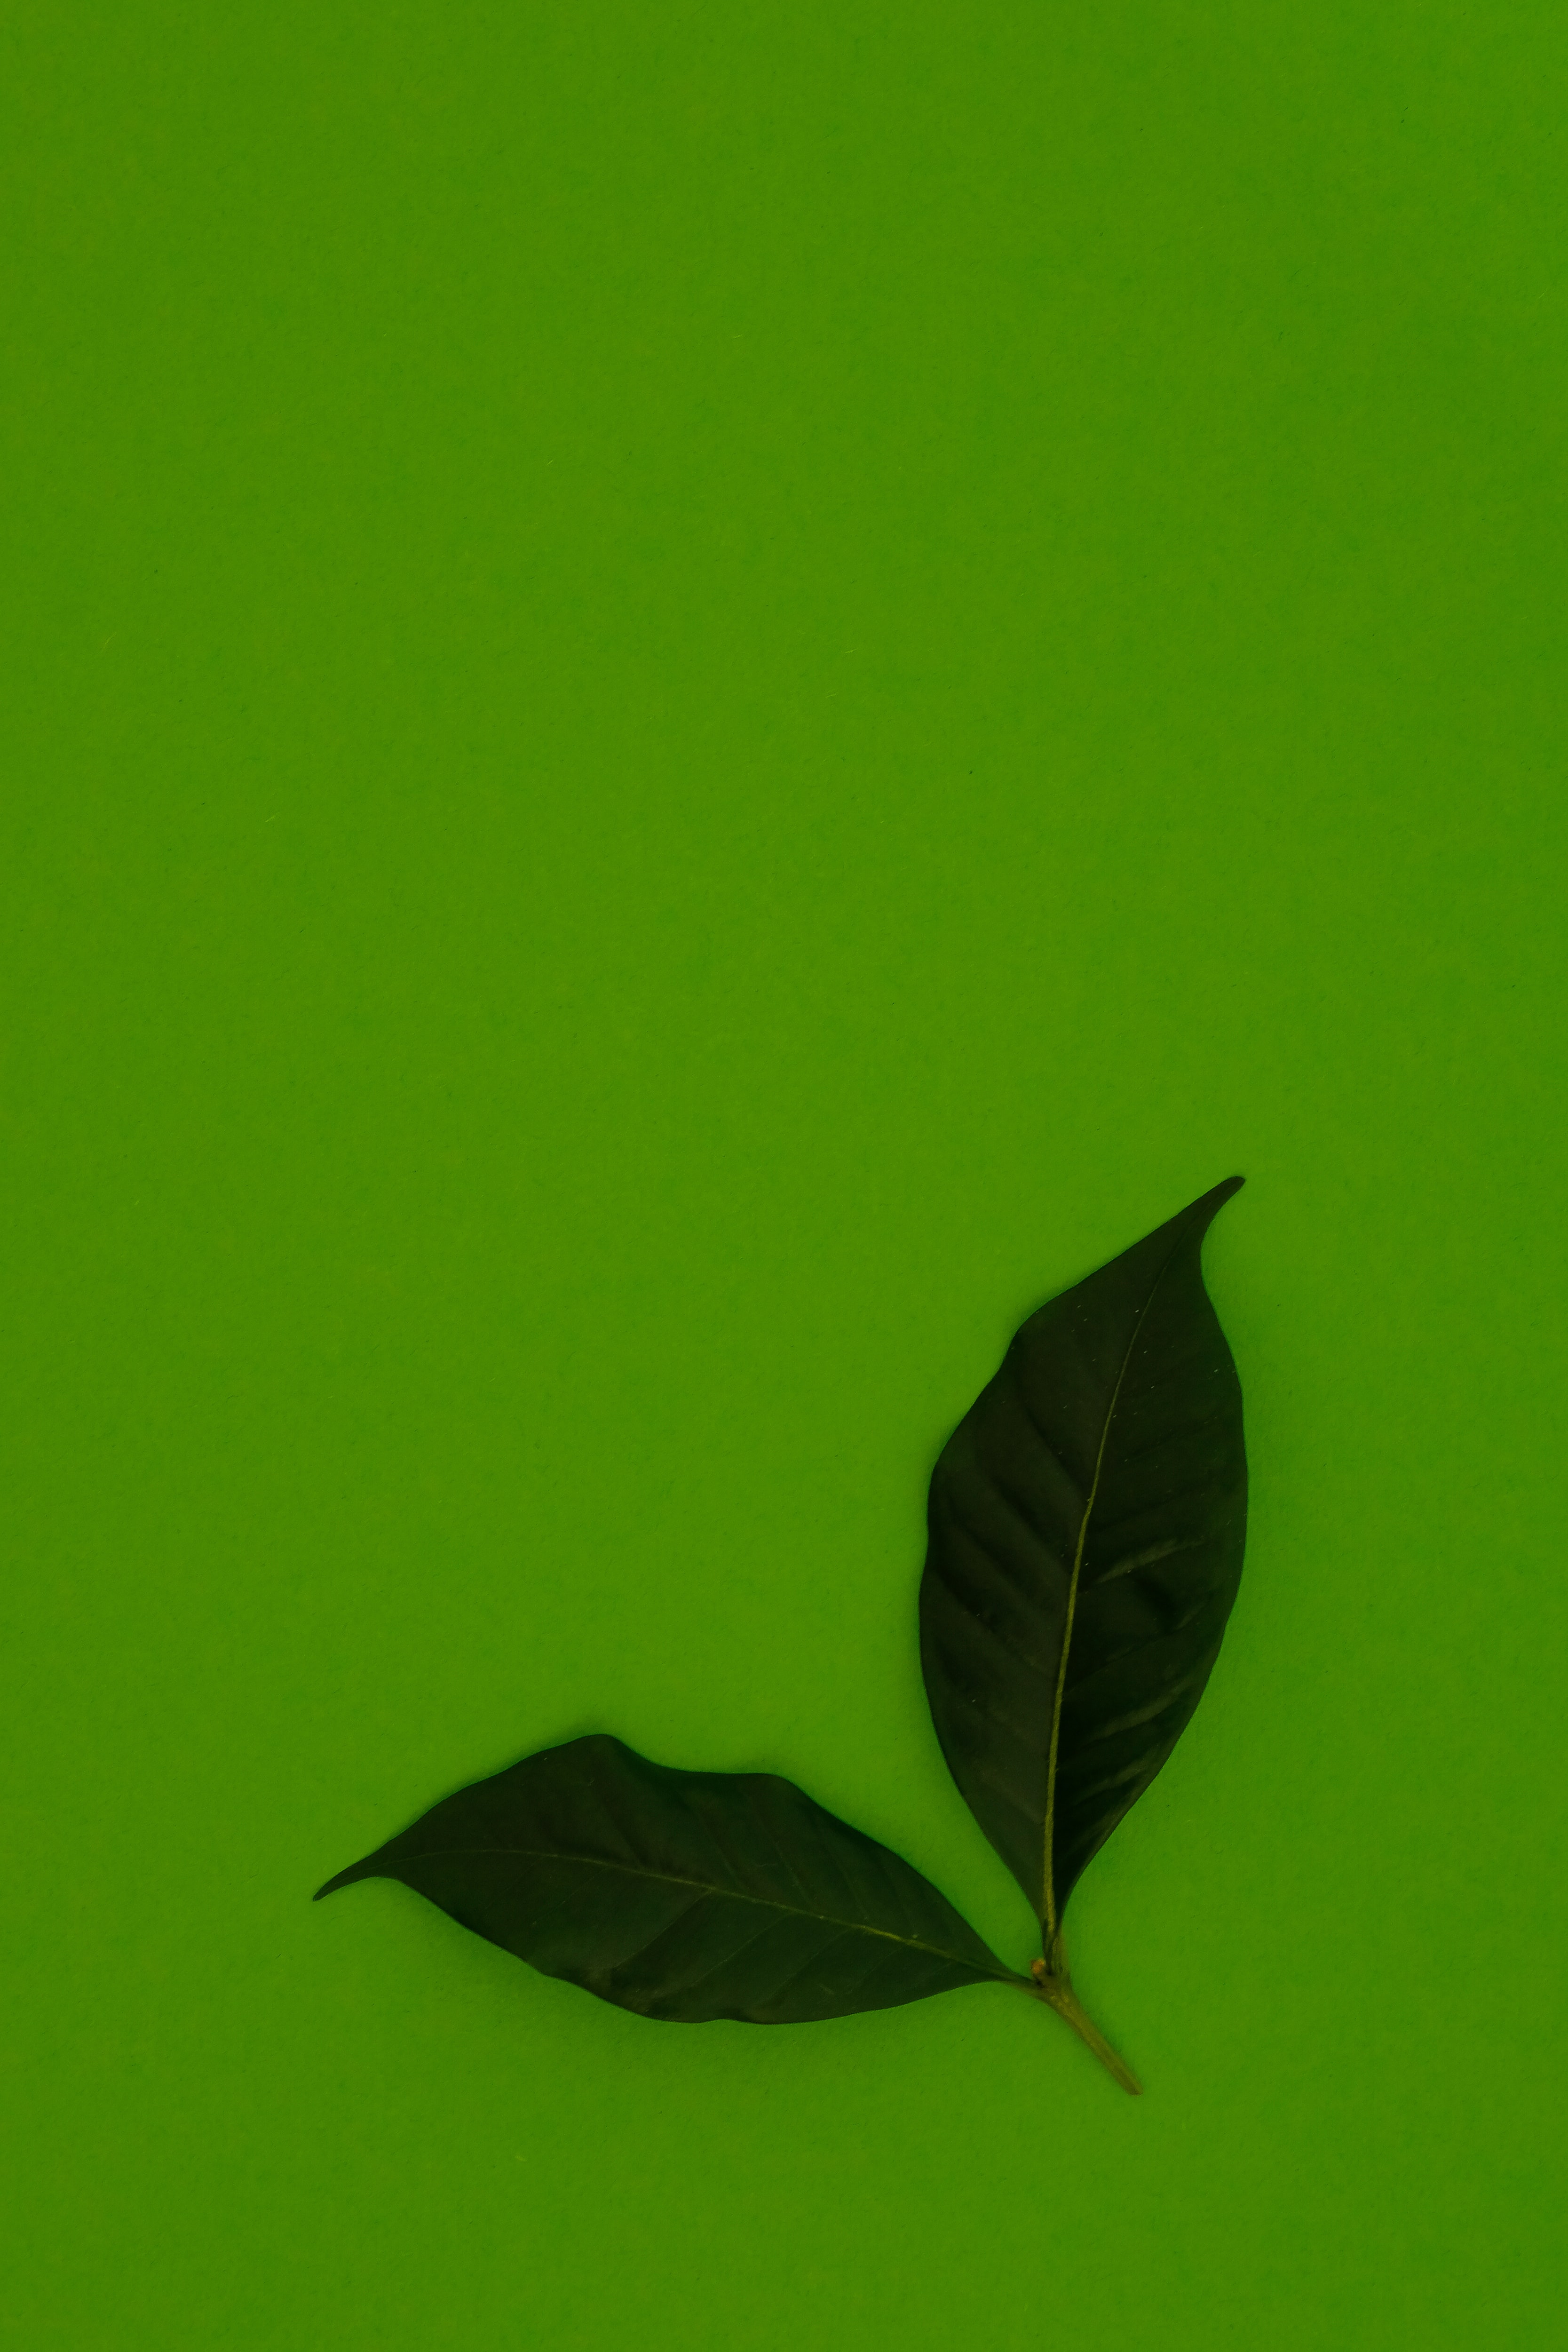 miscellanea, background, leaves, green, miscellaneous iphone wallpaper